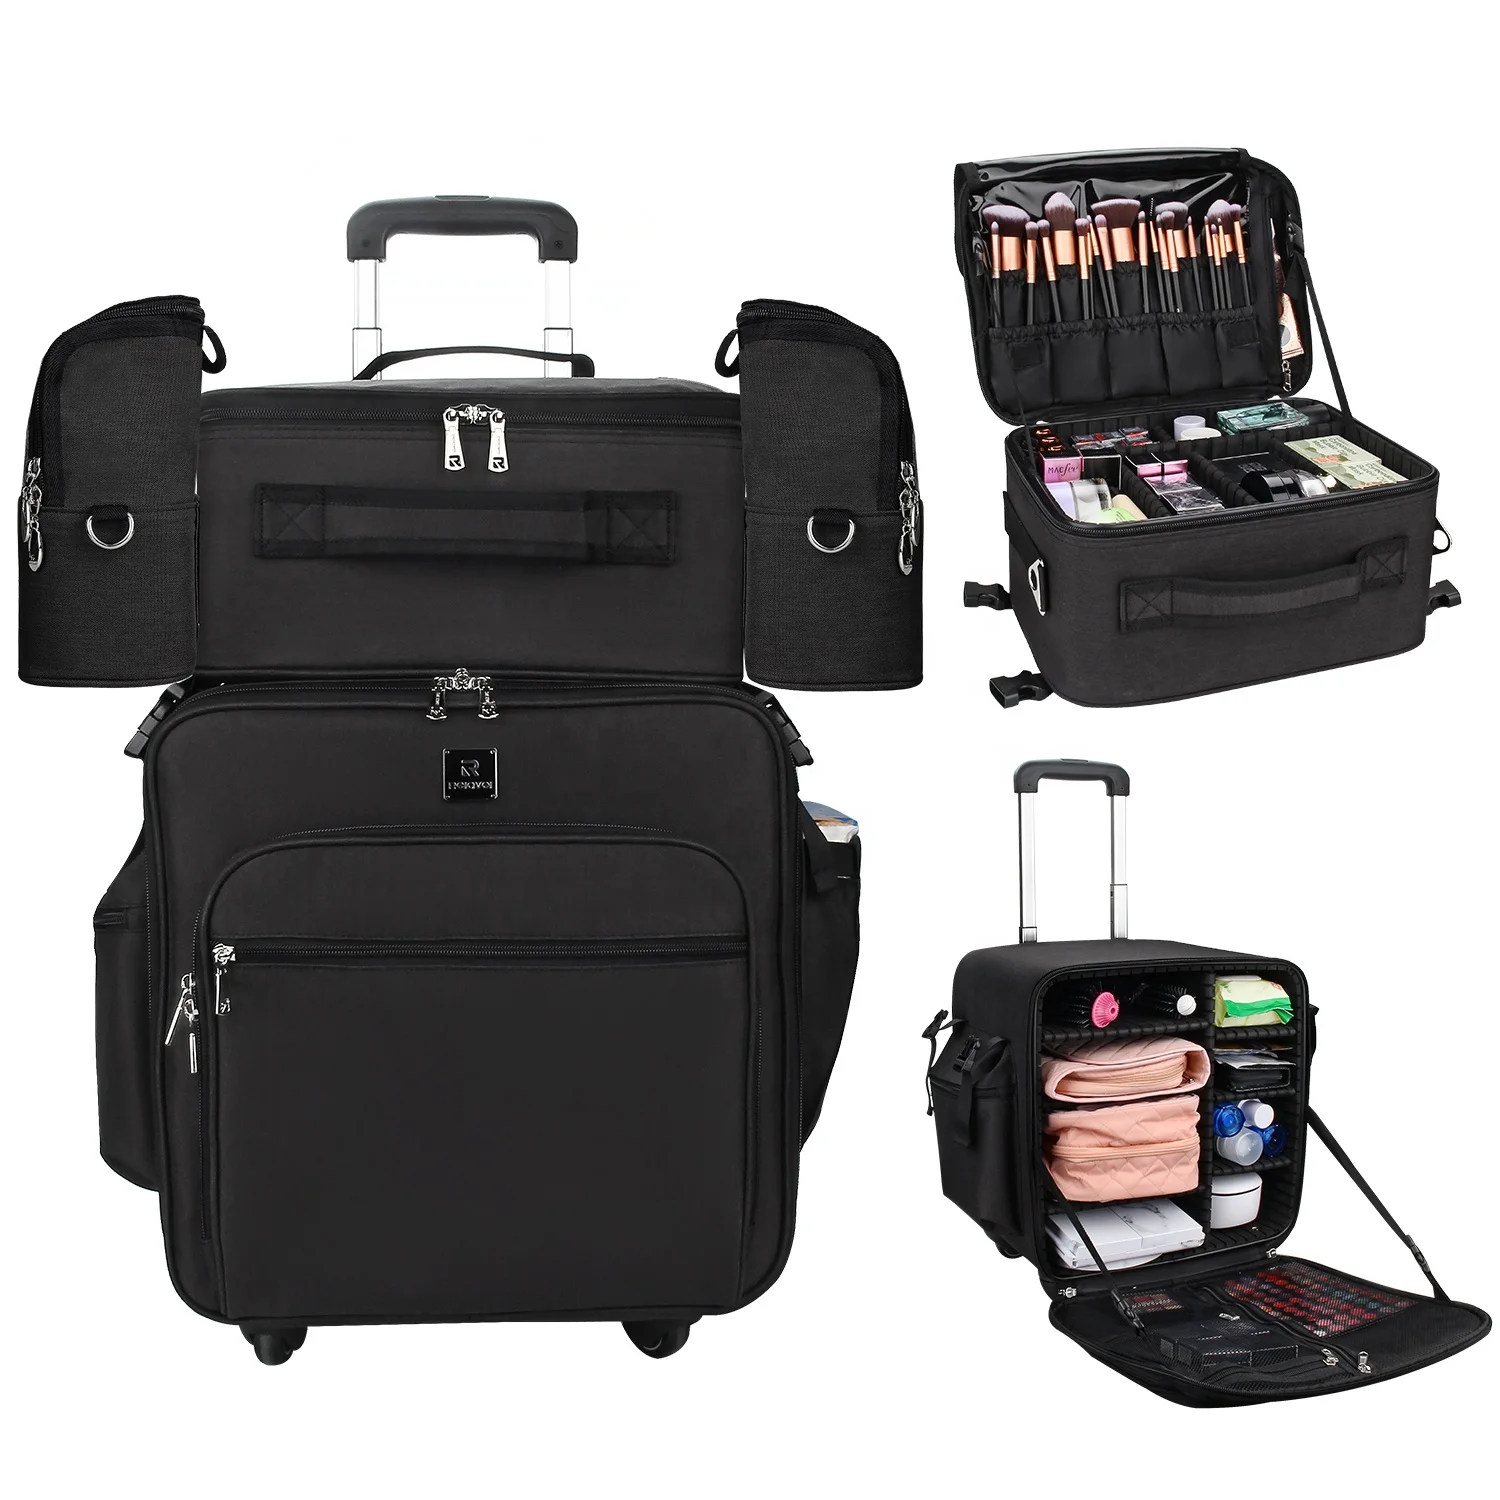 

Relavel Professional Multifunctional 4 In 1 Travel Train Rolling Nylon Makeup Case for Artist Trolley Case